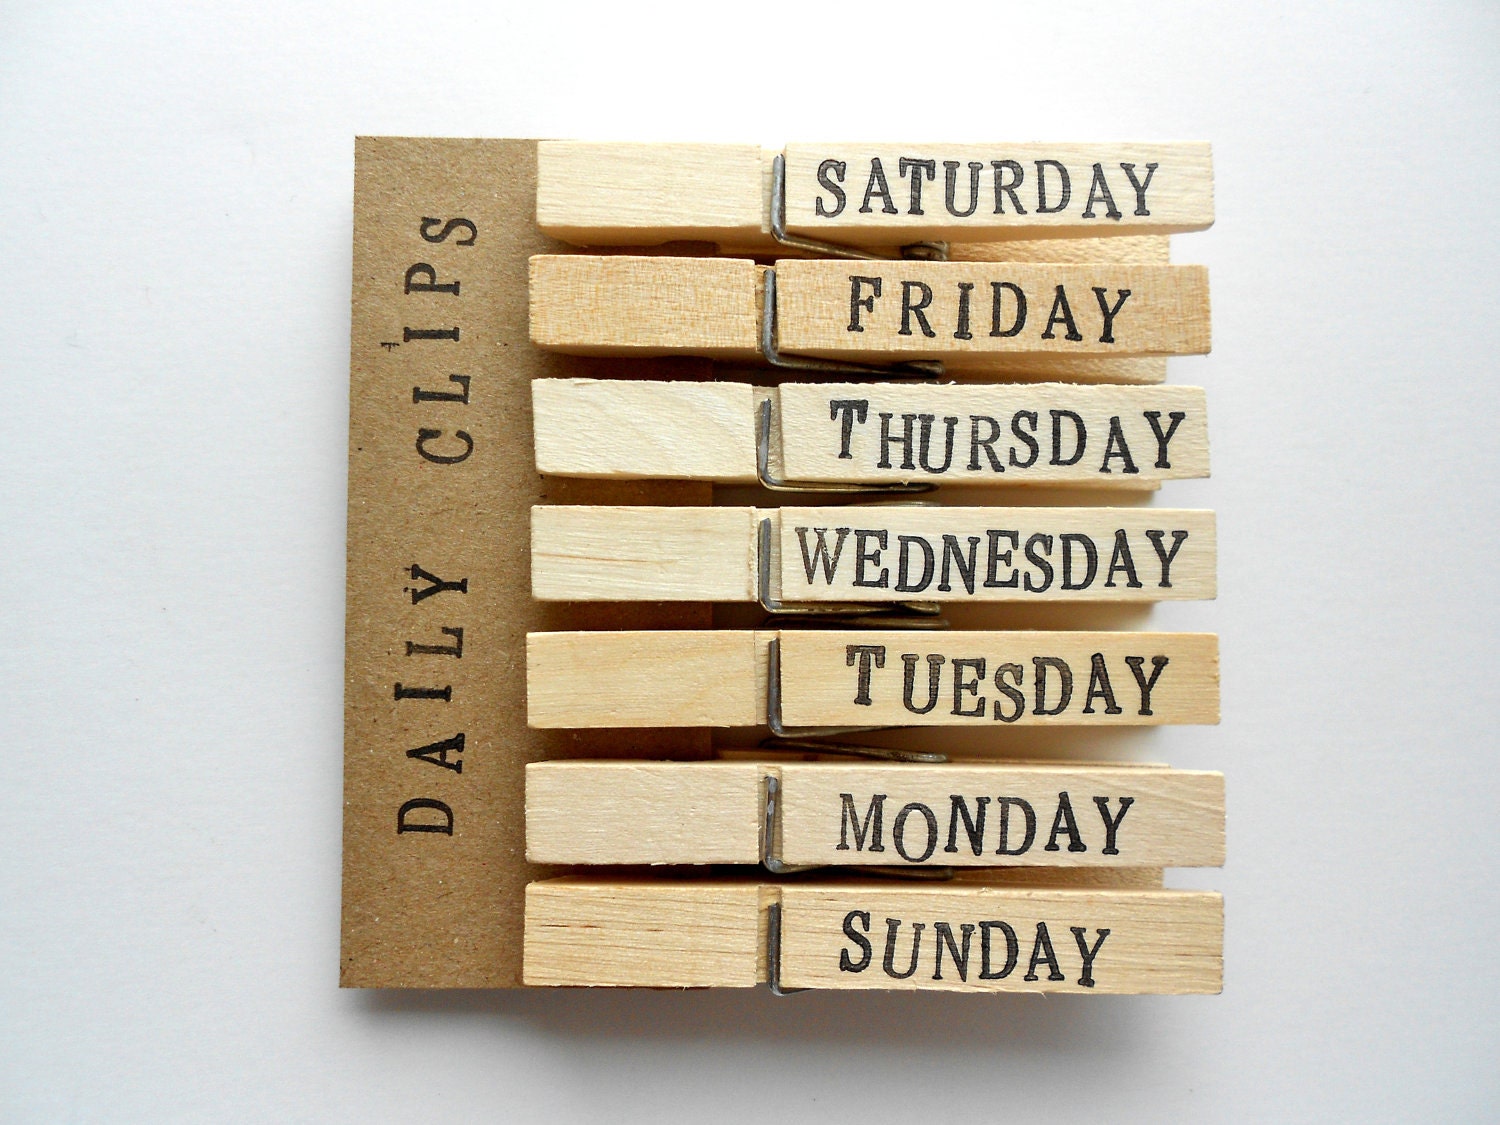 Days of the Week Clothespins - Hand Stamped - Set of 7 - Large - Free US Shipping